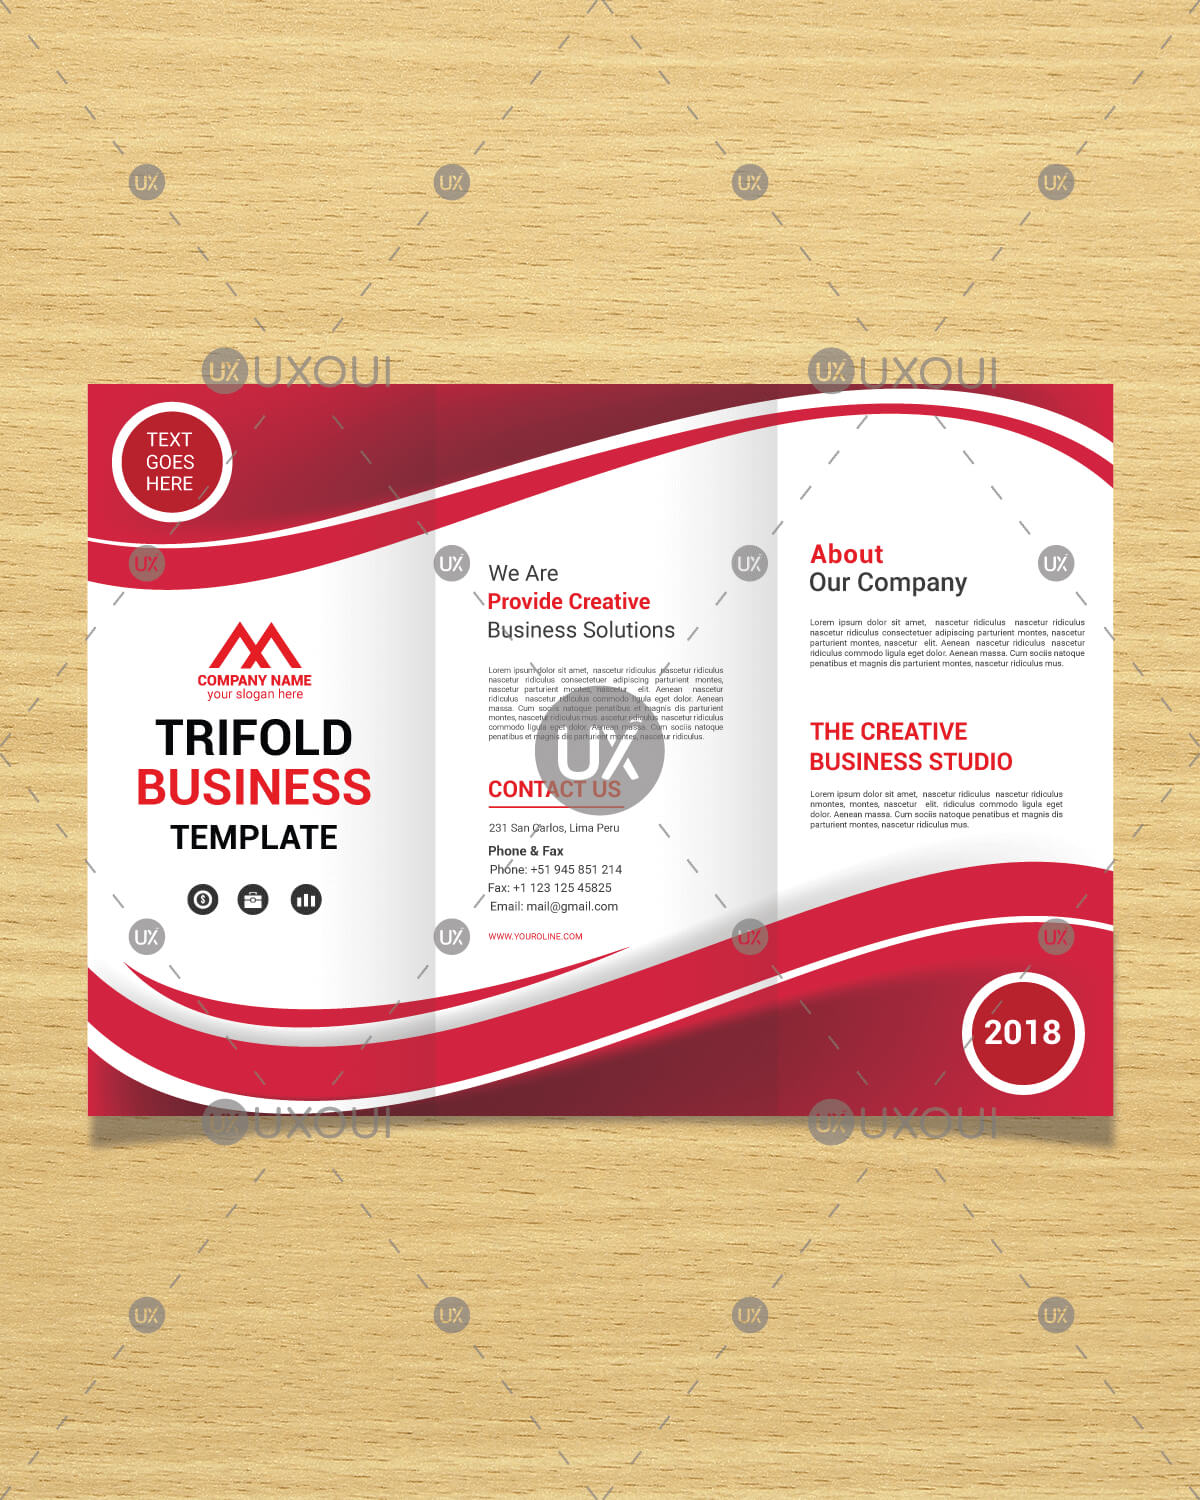 Professional Wavy Trifold Business Brochure Design Template For Professional Brochure Design Templates